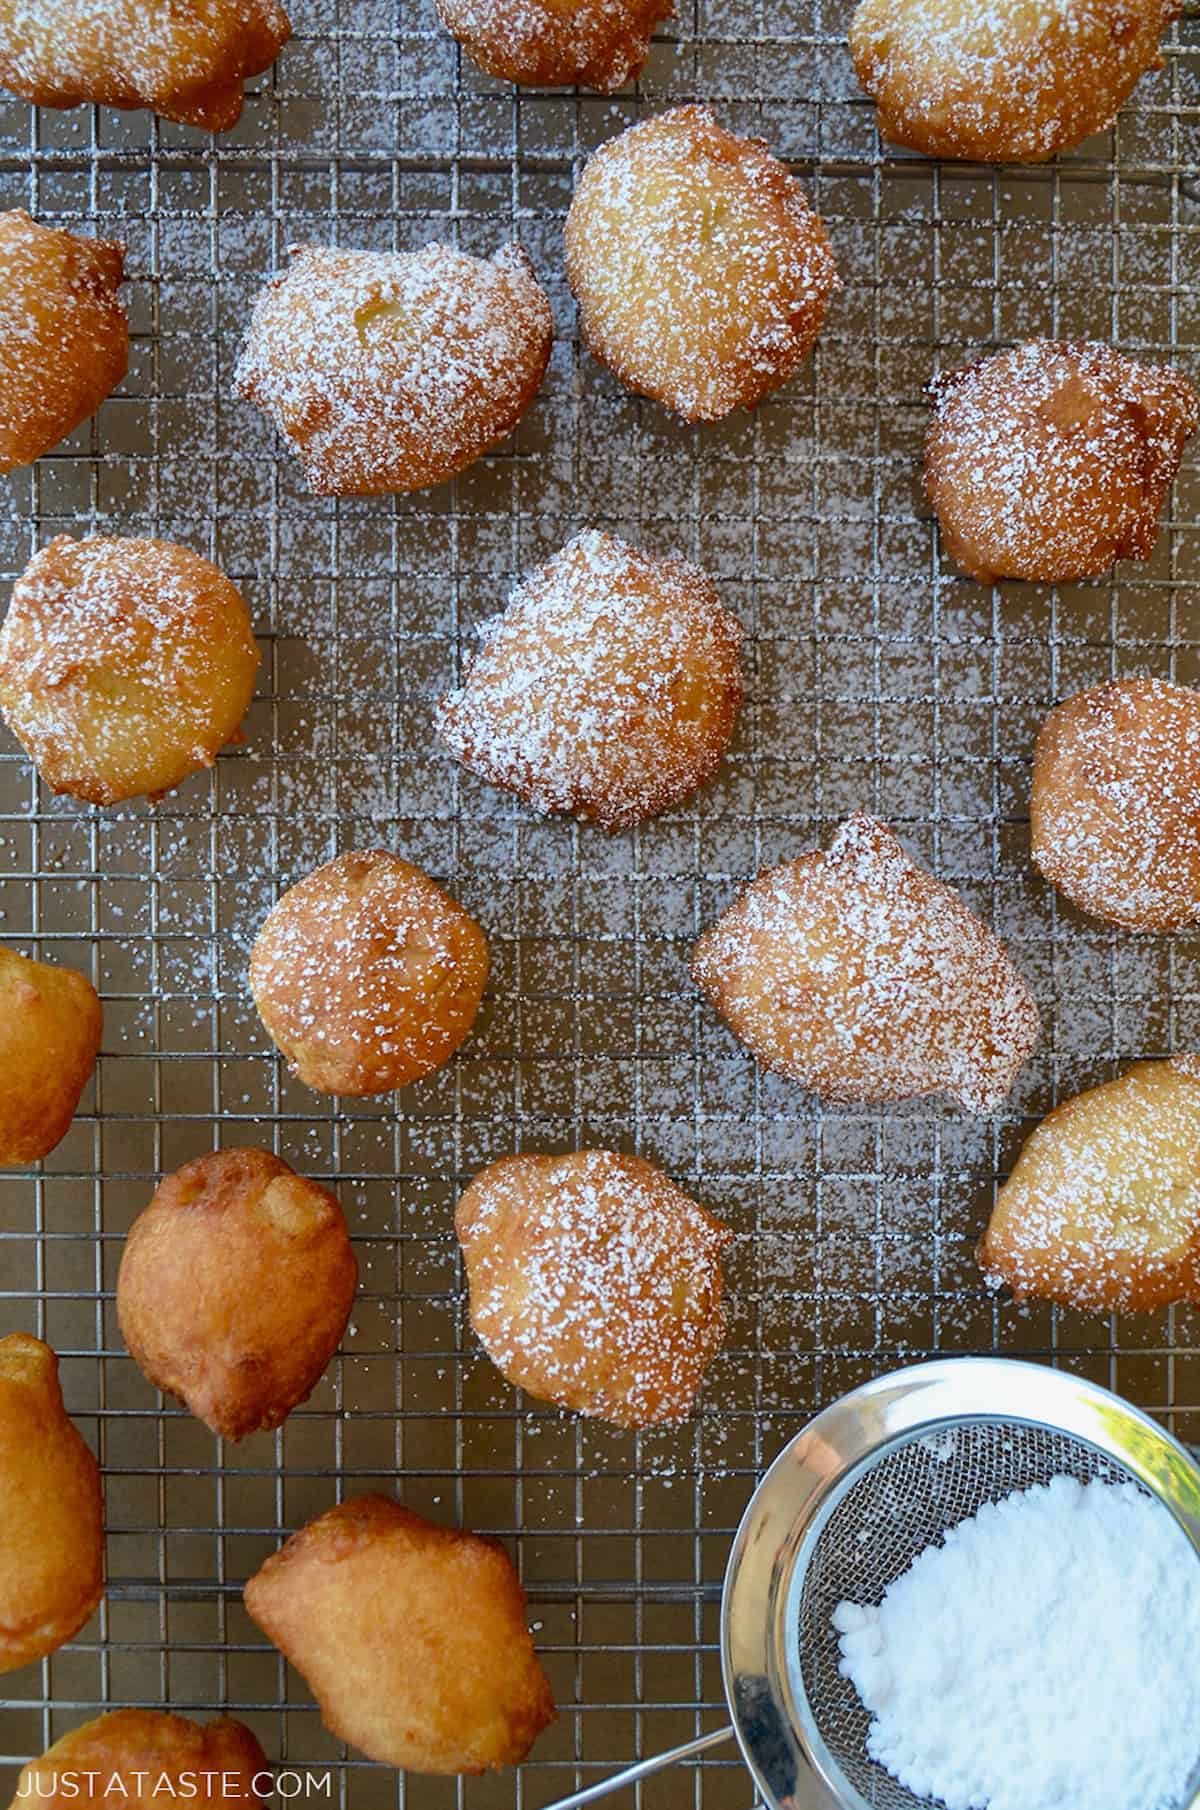 Apple fritter doughnut holes dusted with powdered sugar on a wire rack.